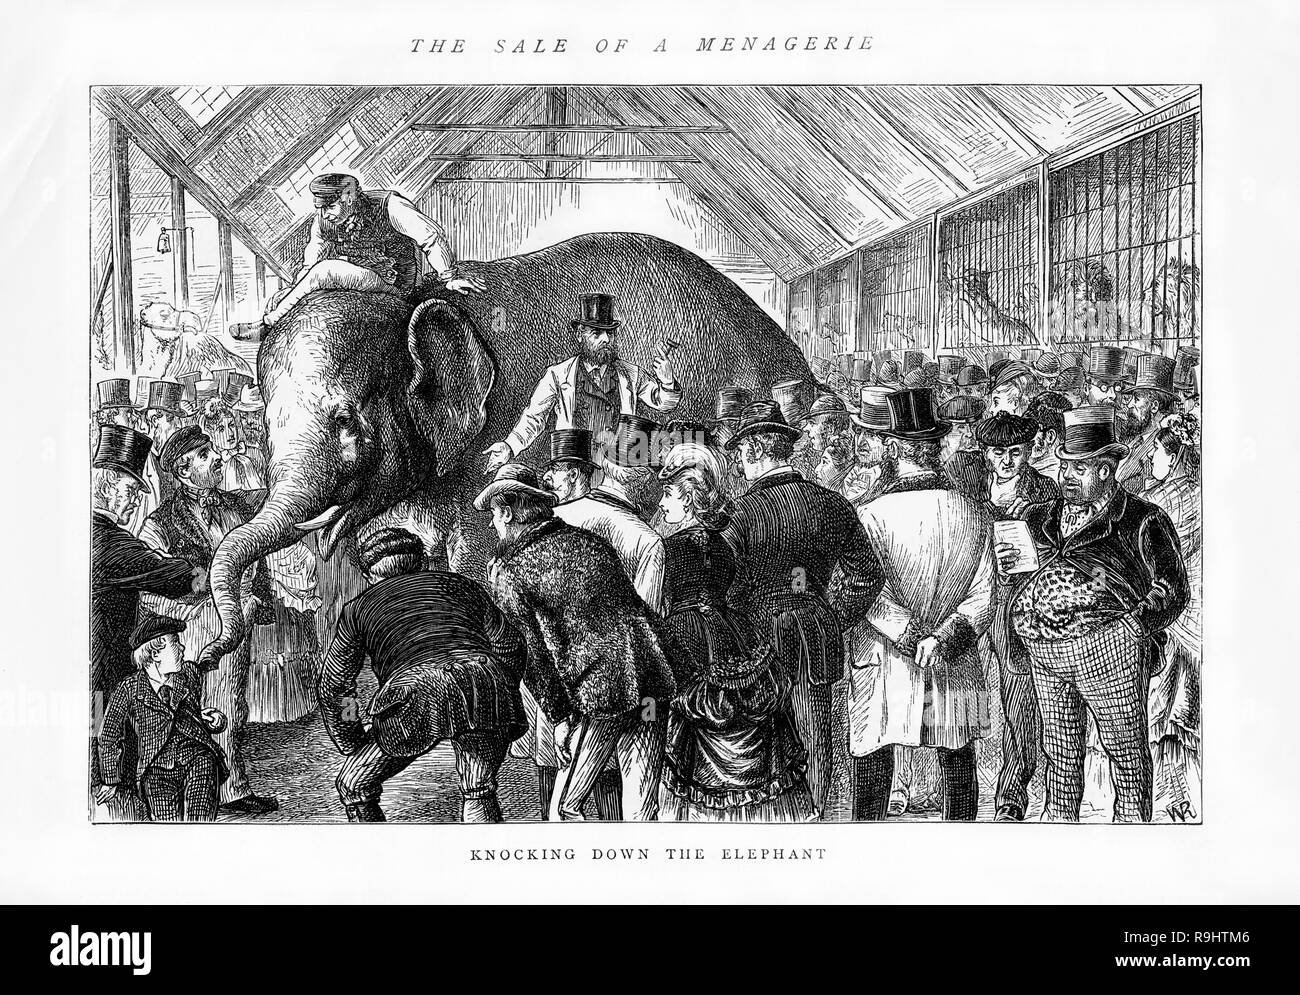 Engraving showing an elephant as it is auctioned with a crowd in Victorian dress milling around. In front of the elephant the auctioneer has his gavel raised. Stock Photo